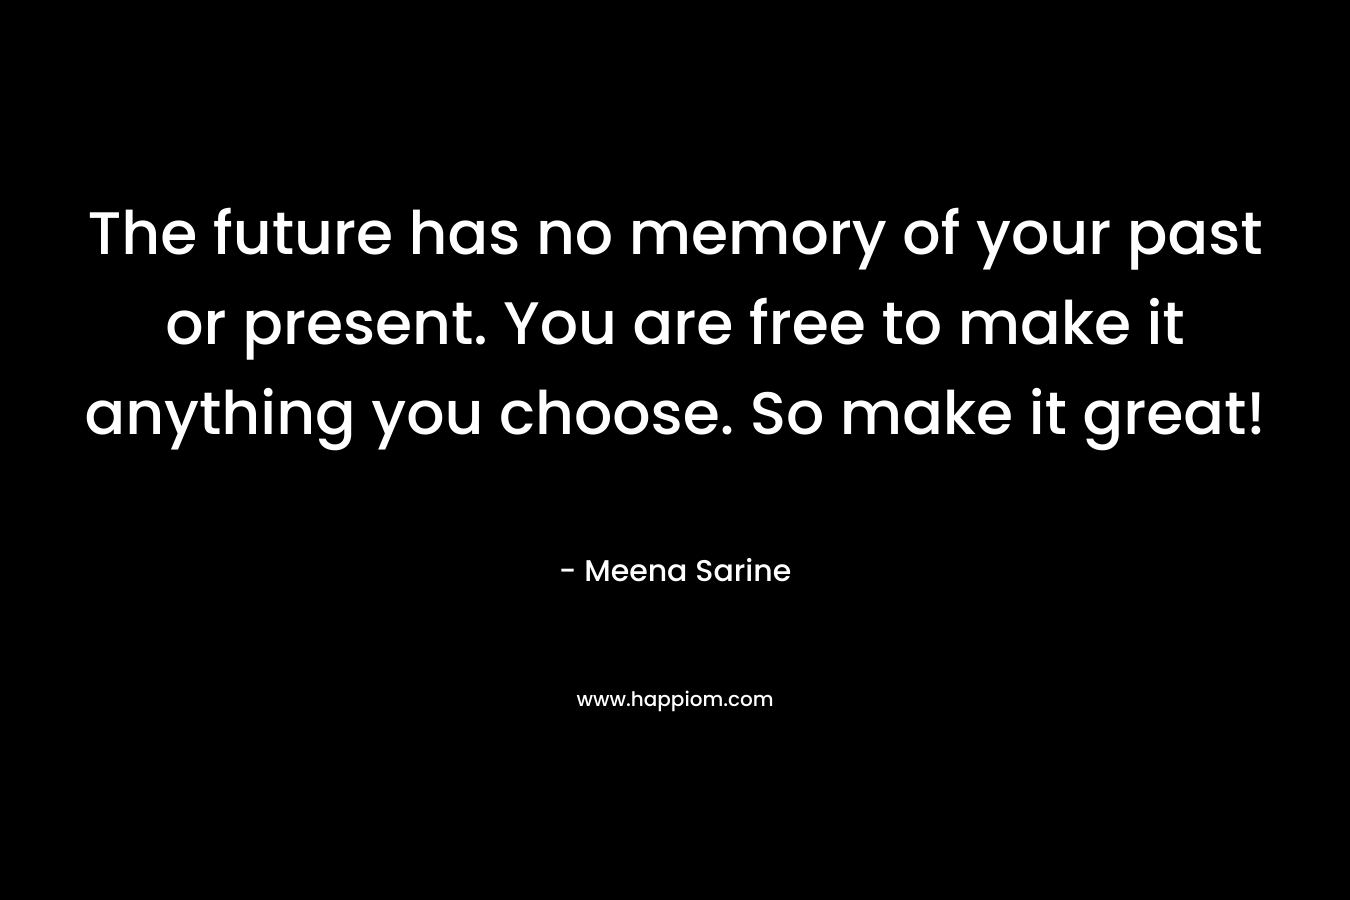 The future has no memory of your past or present. You are free to make it anything you choose. So make it great!